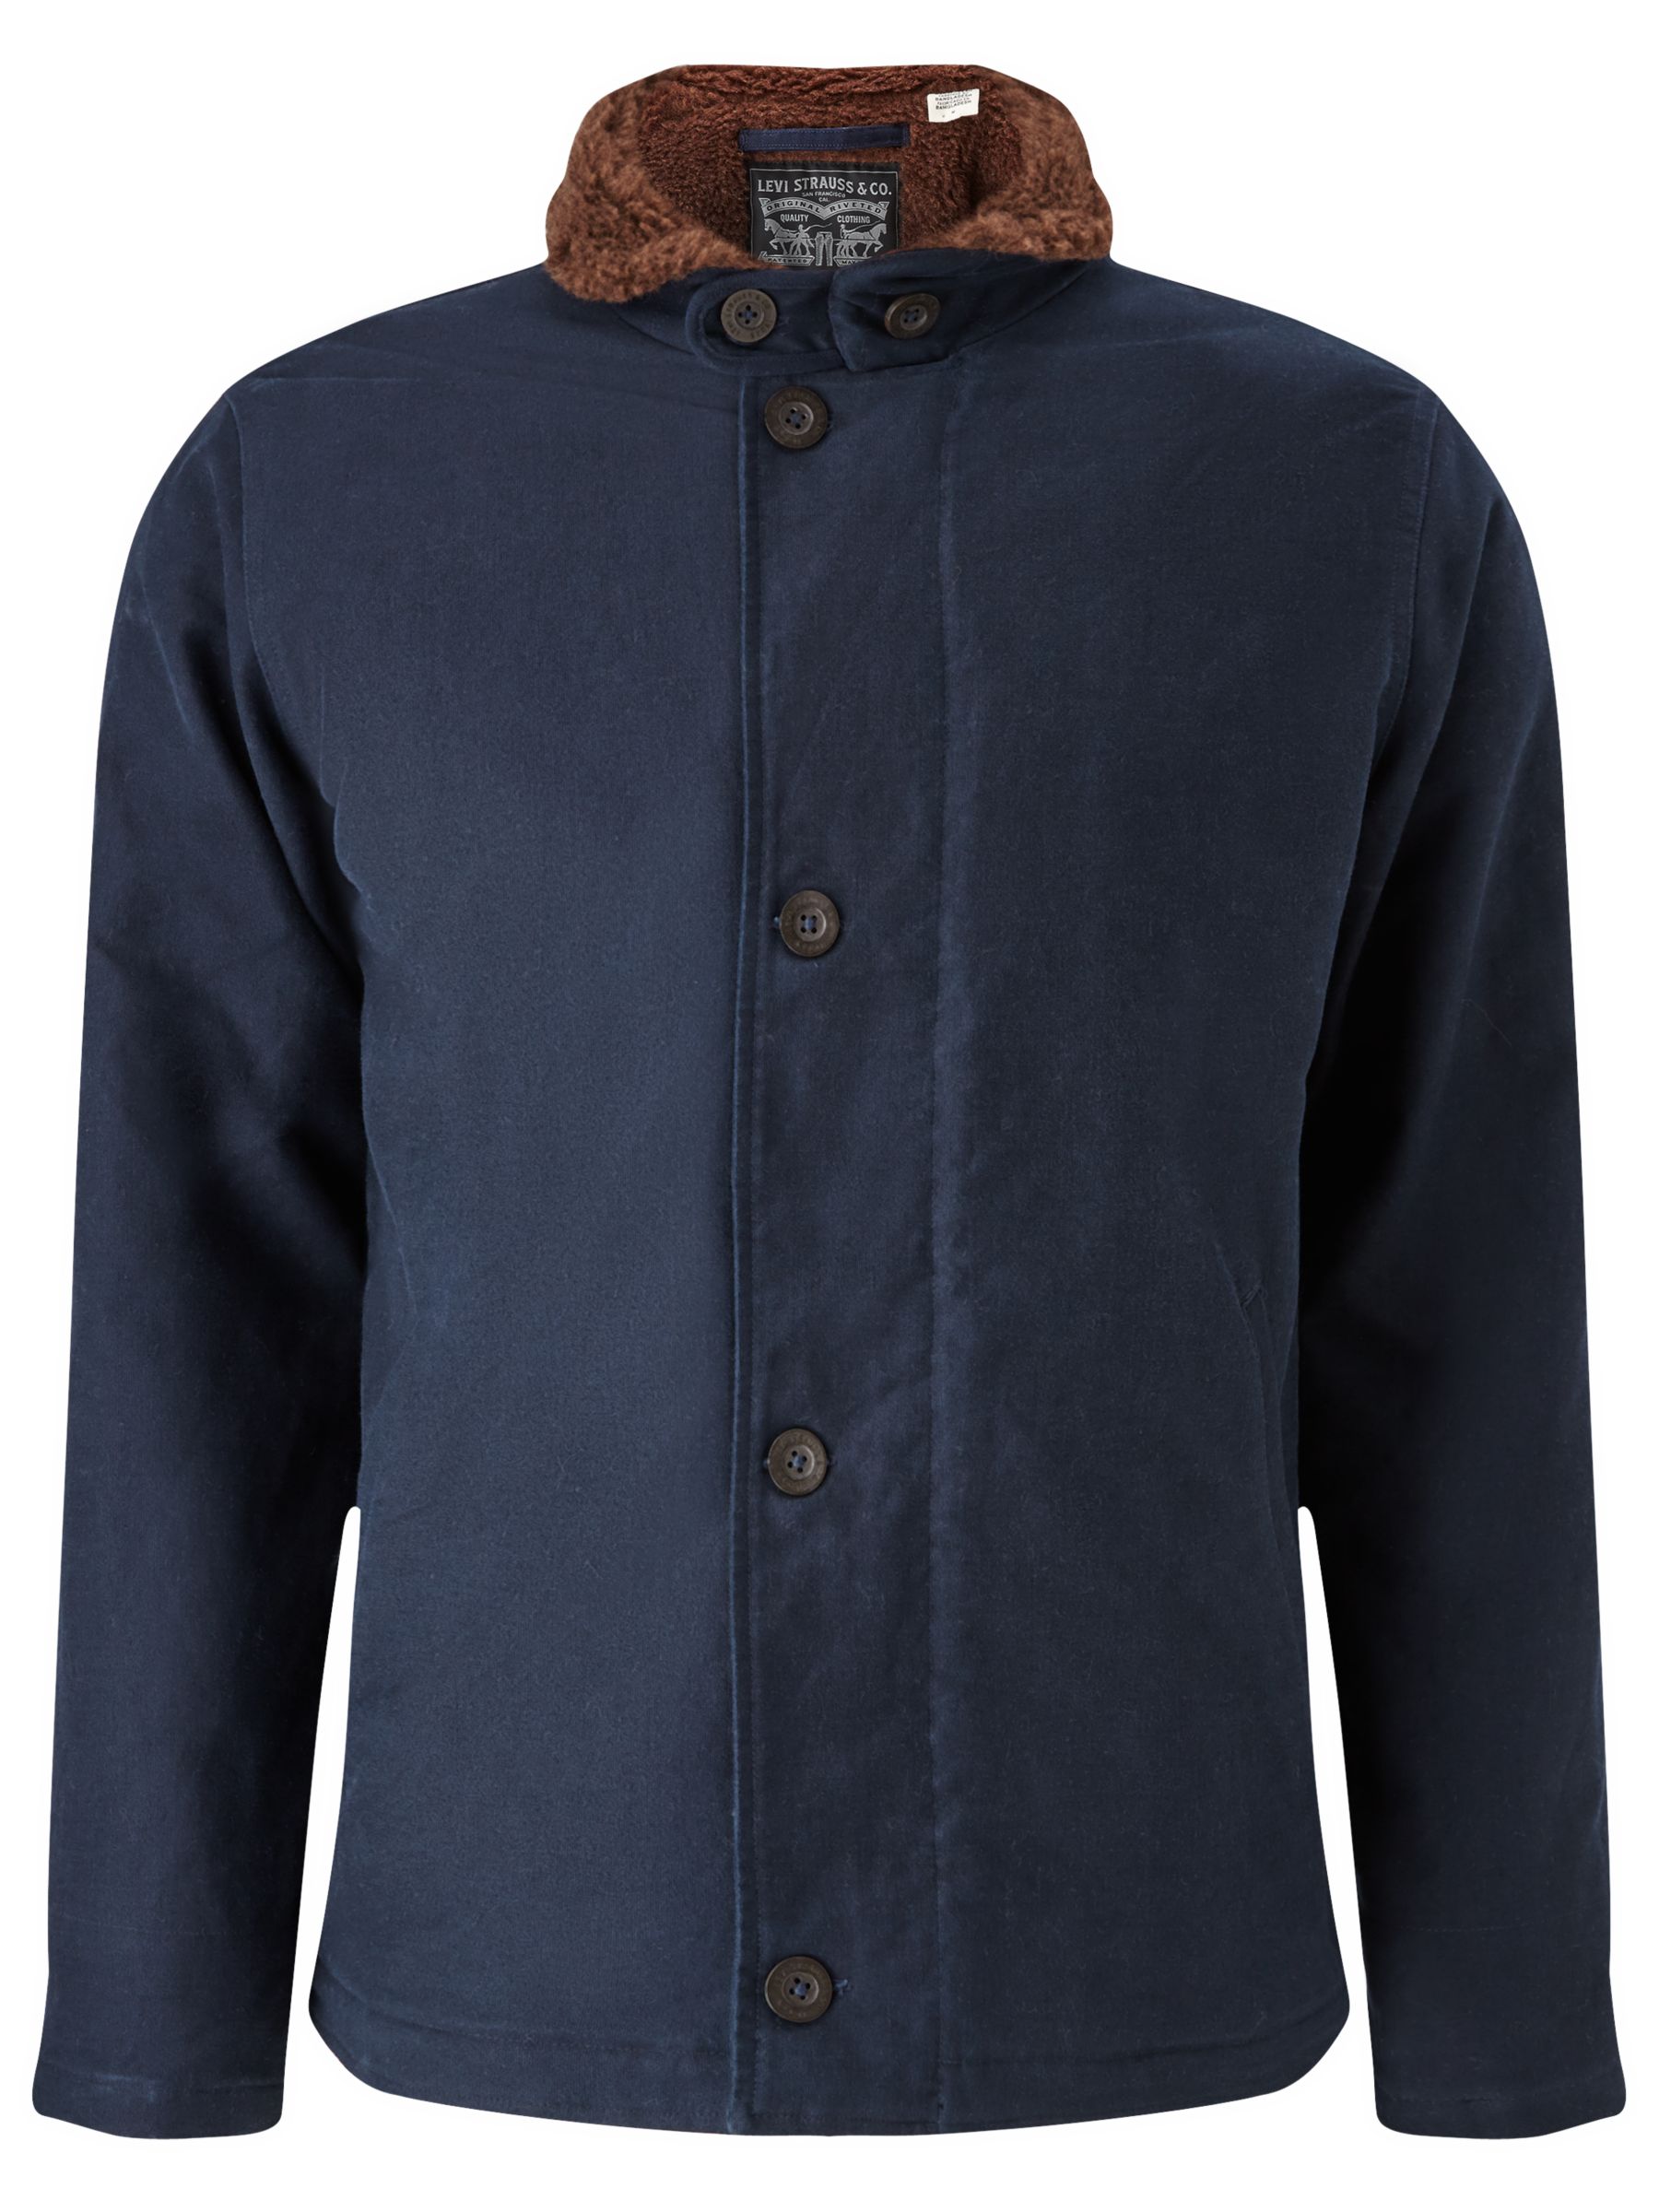 Levi's Deck Coat, Nightwatch Blue at 